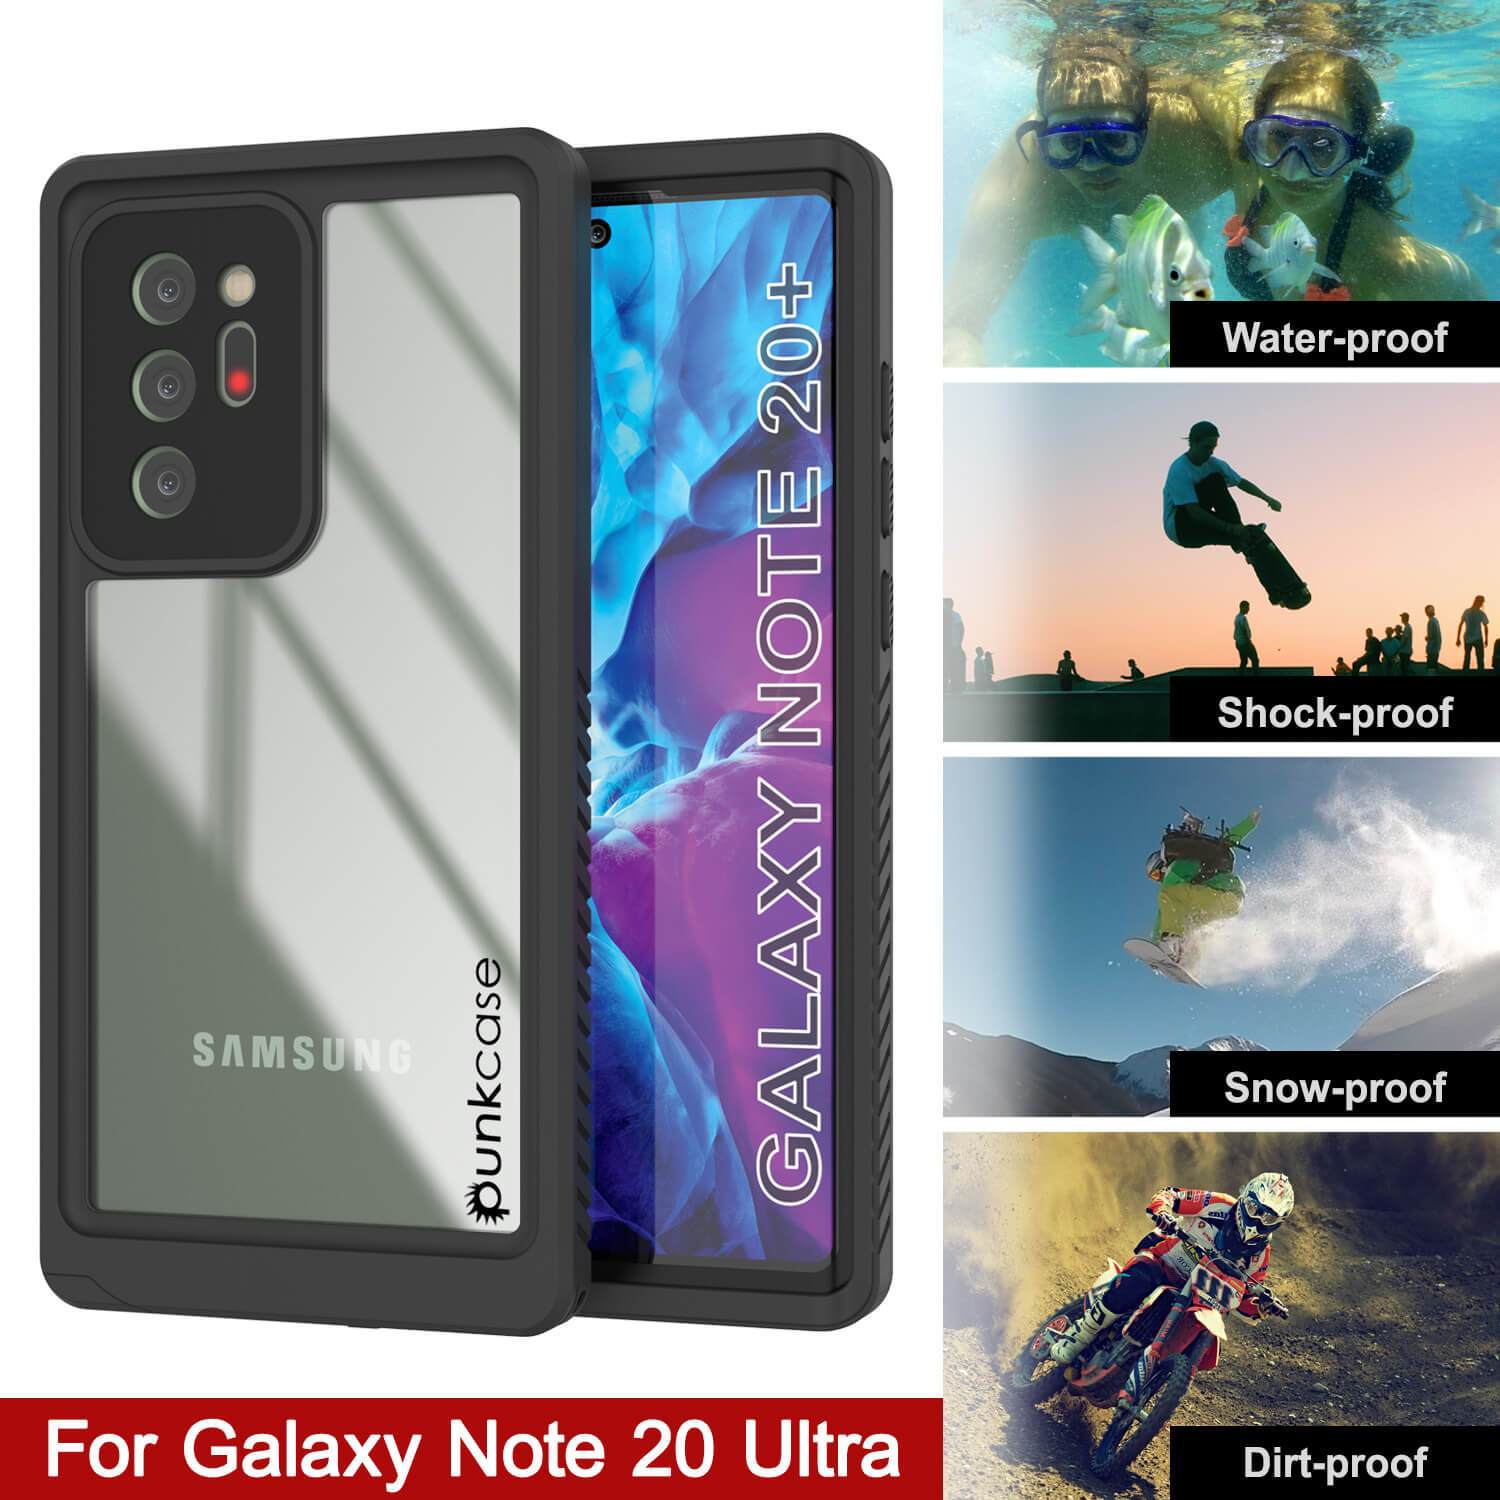 Galaxy Note 20 Ultra Case, Punkcase [Extreme Series] Armor Cover W/ Built In Screen Protector [Clear]